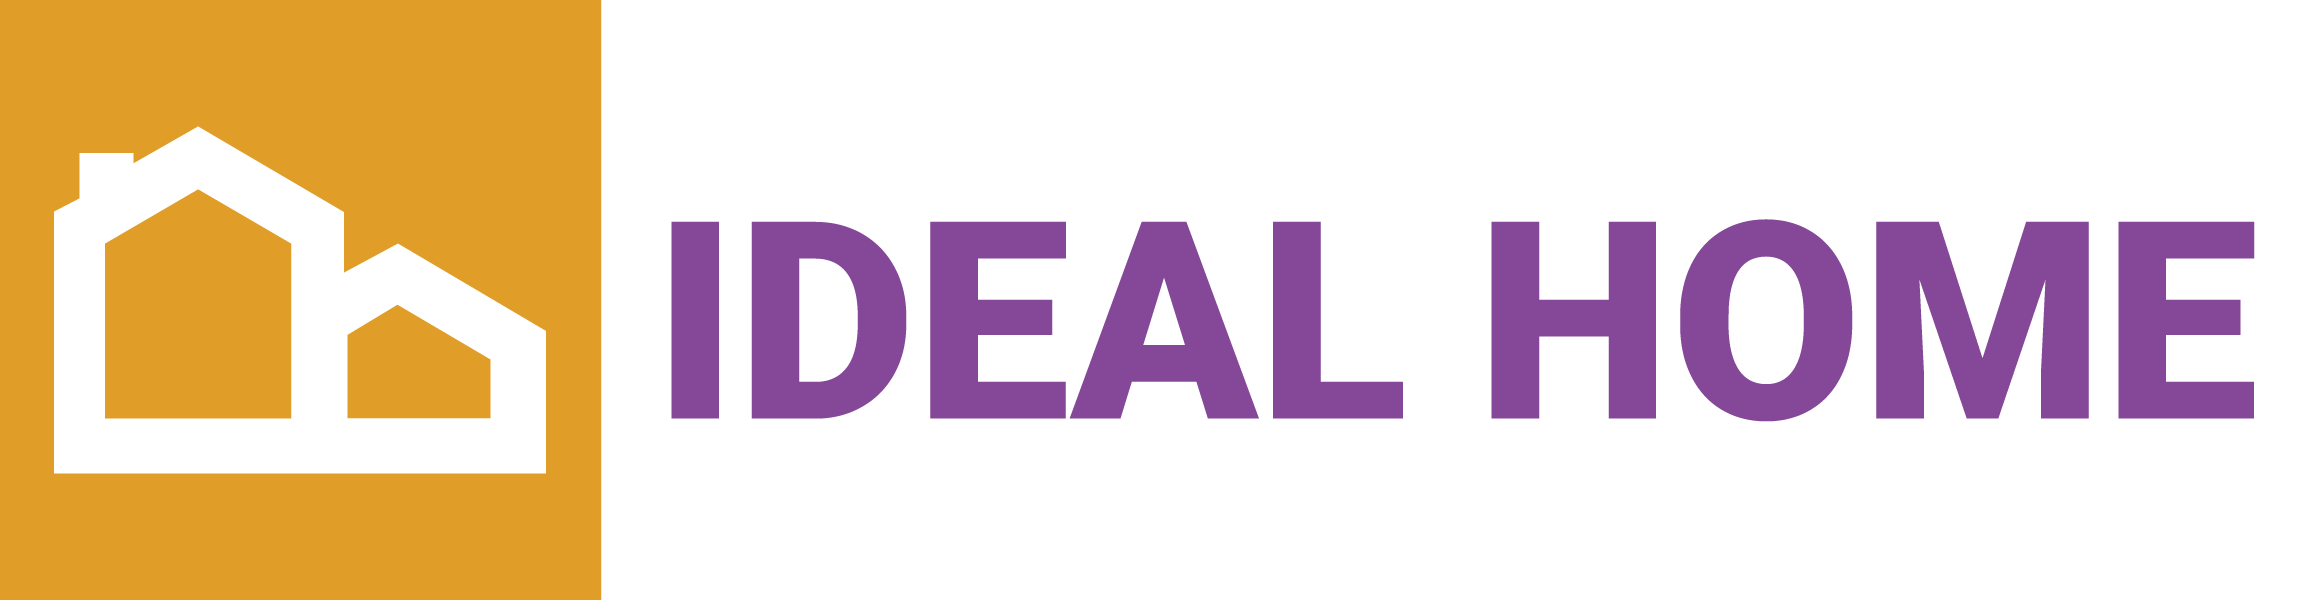 Ideal-Home immobilier